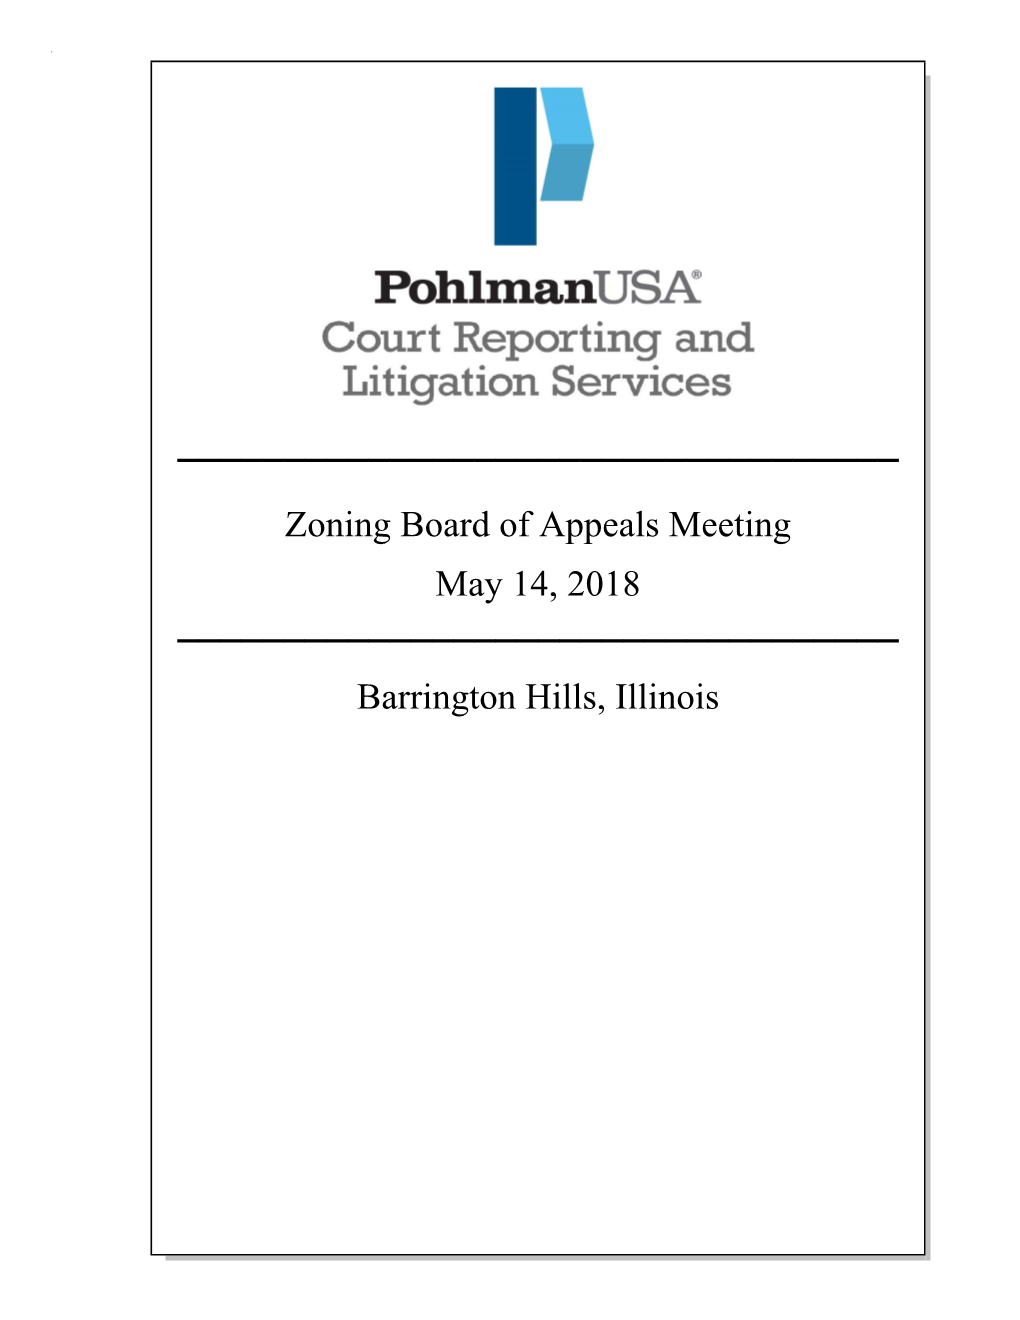 Zoning Board of Appeals Meeting May 14, 2018 Barrington Hills, Illinois